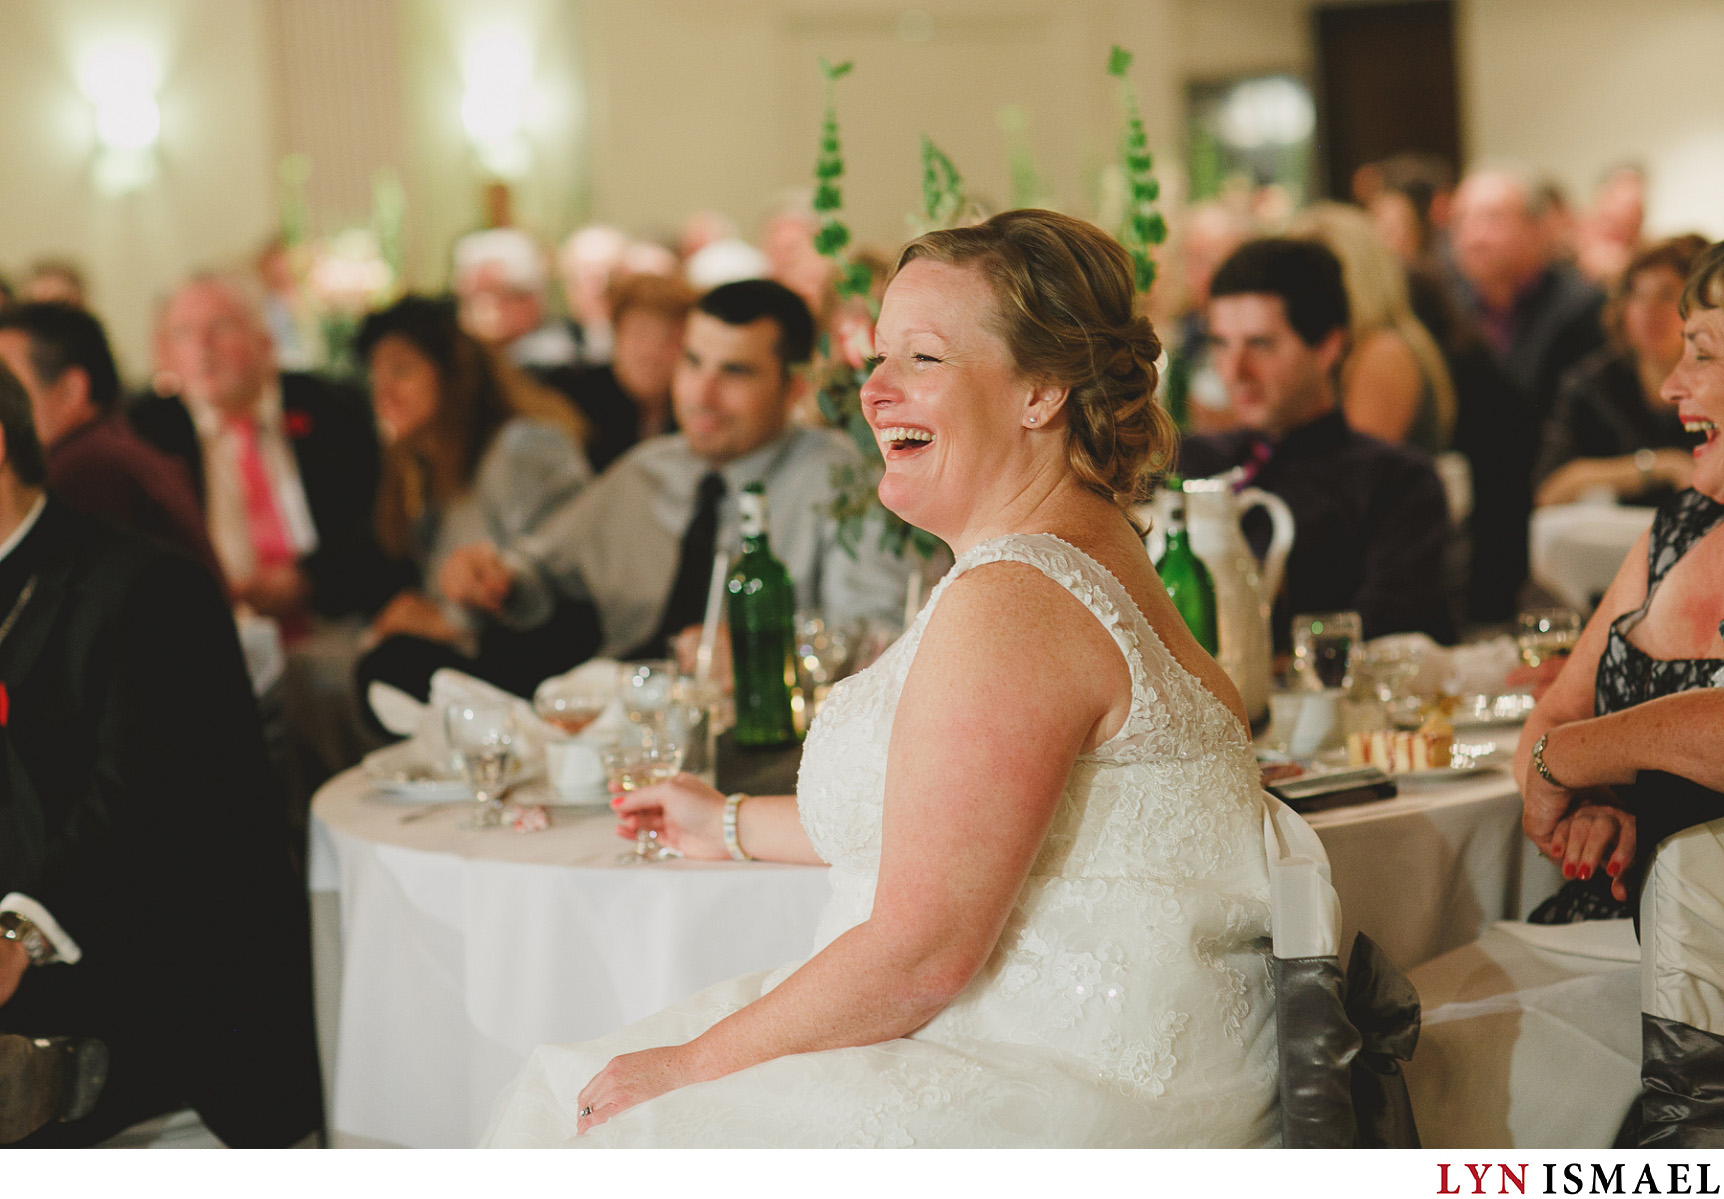 Brides reaction to her sisters' toast.